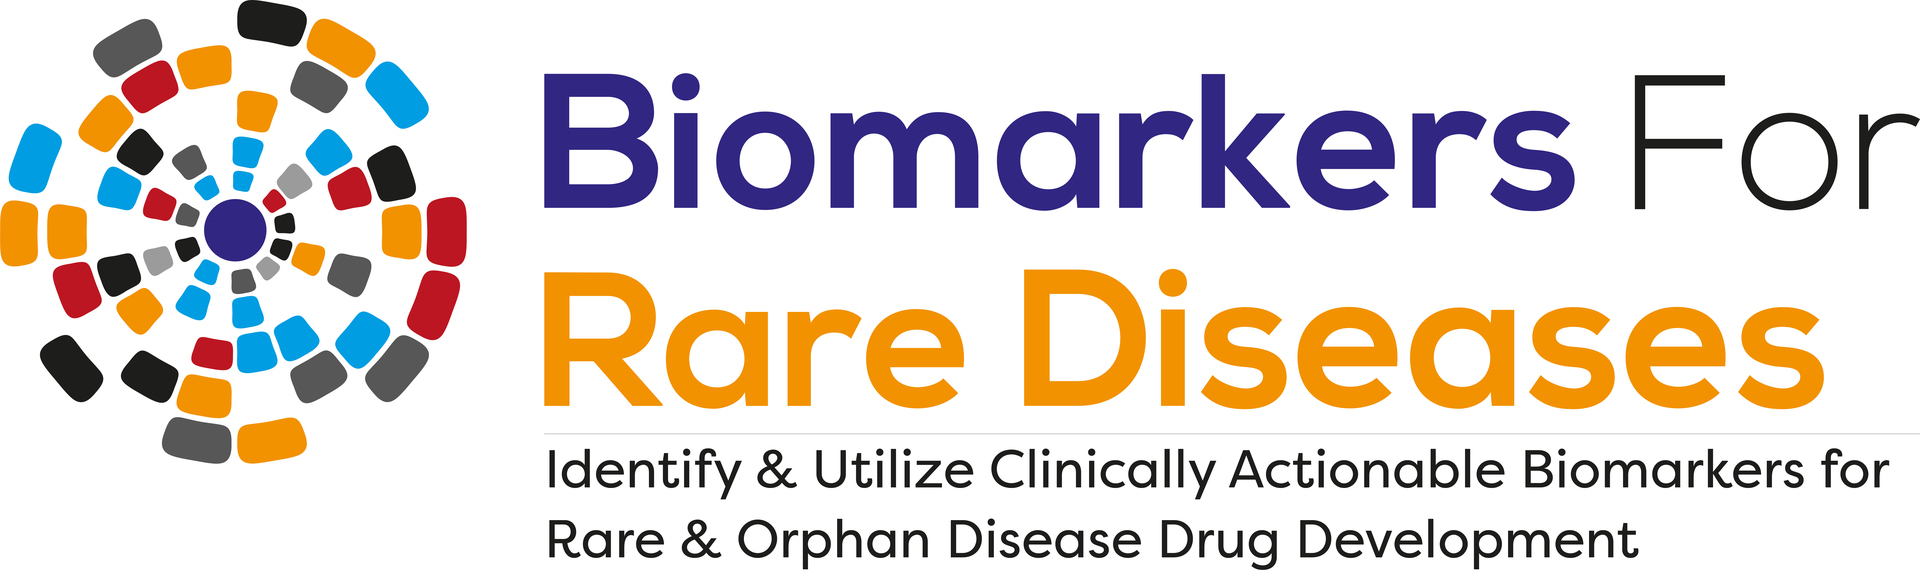 Biomarker for Rare Diseases Summit, Online Event